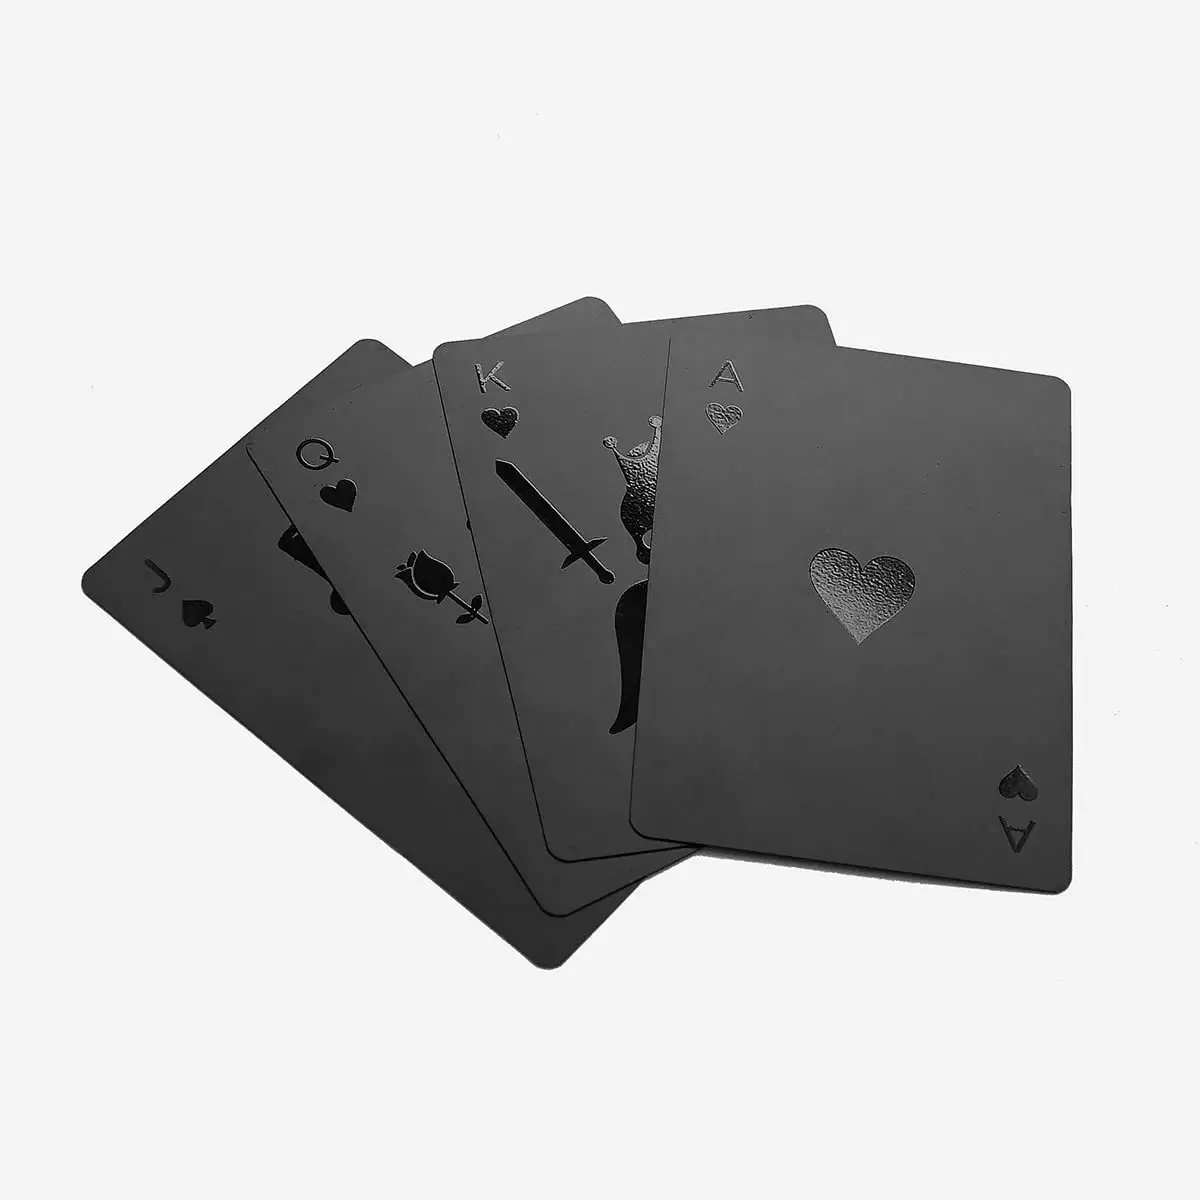 Wholesale Custom Portable Metal Black Poker A Credit Business Card for Holiday Wedding Party Gifts